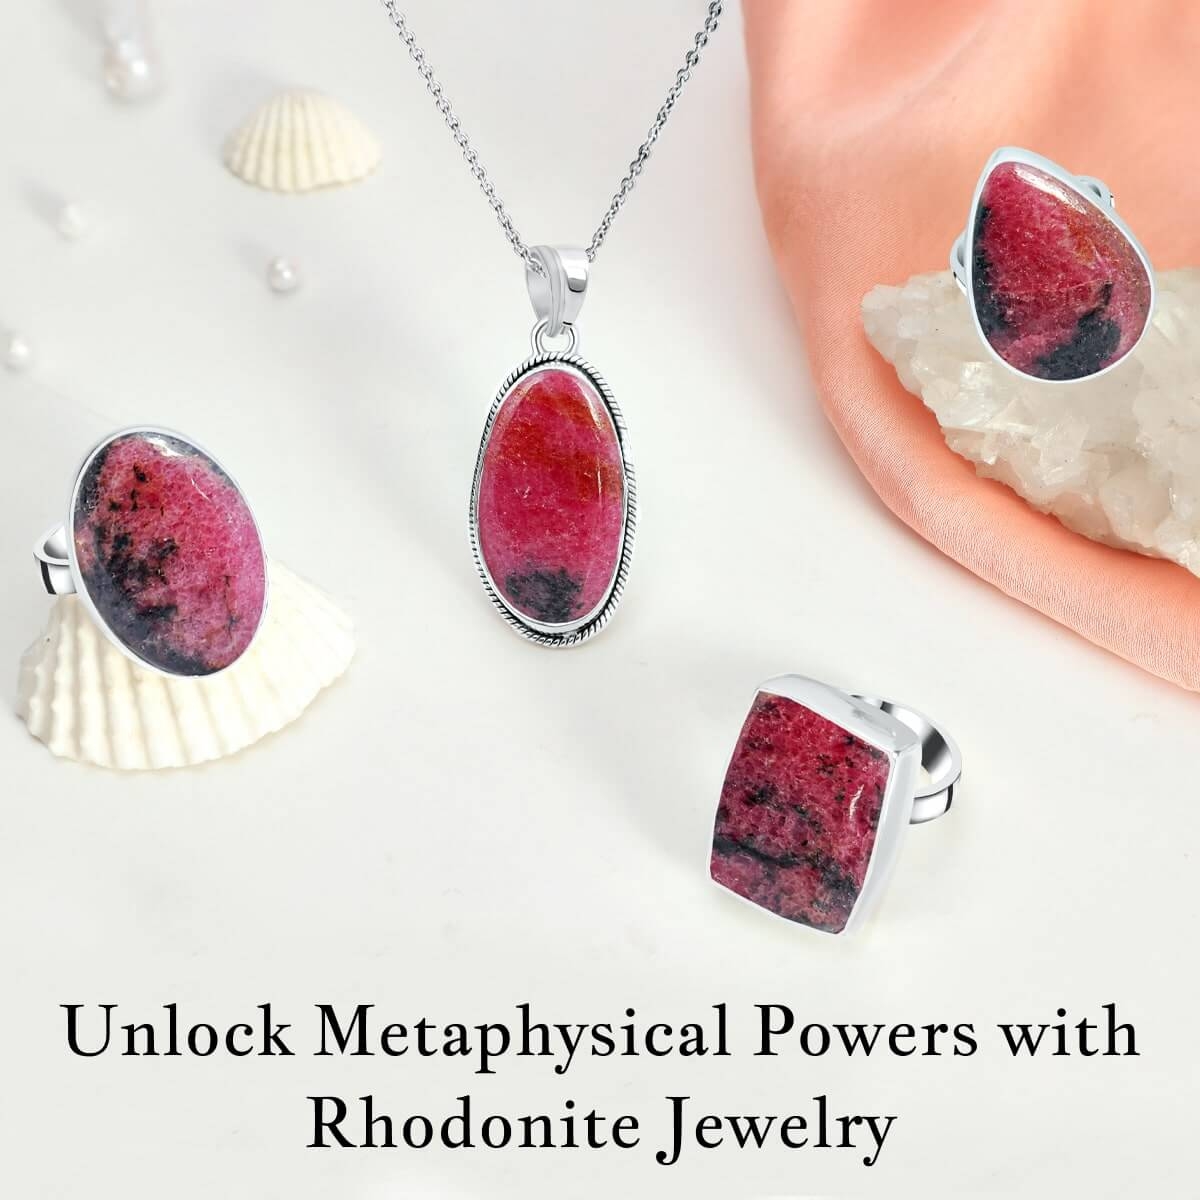 Metaphysical Properties Derived from Rhodonite Jewelry